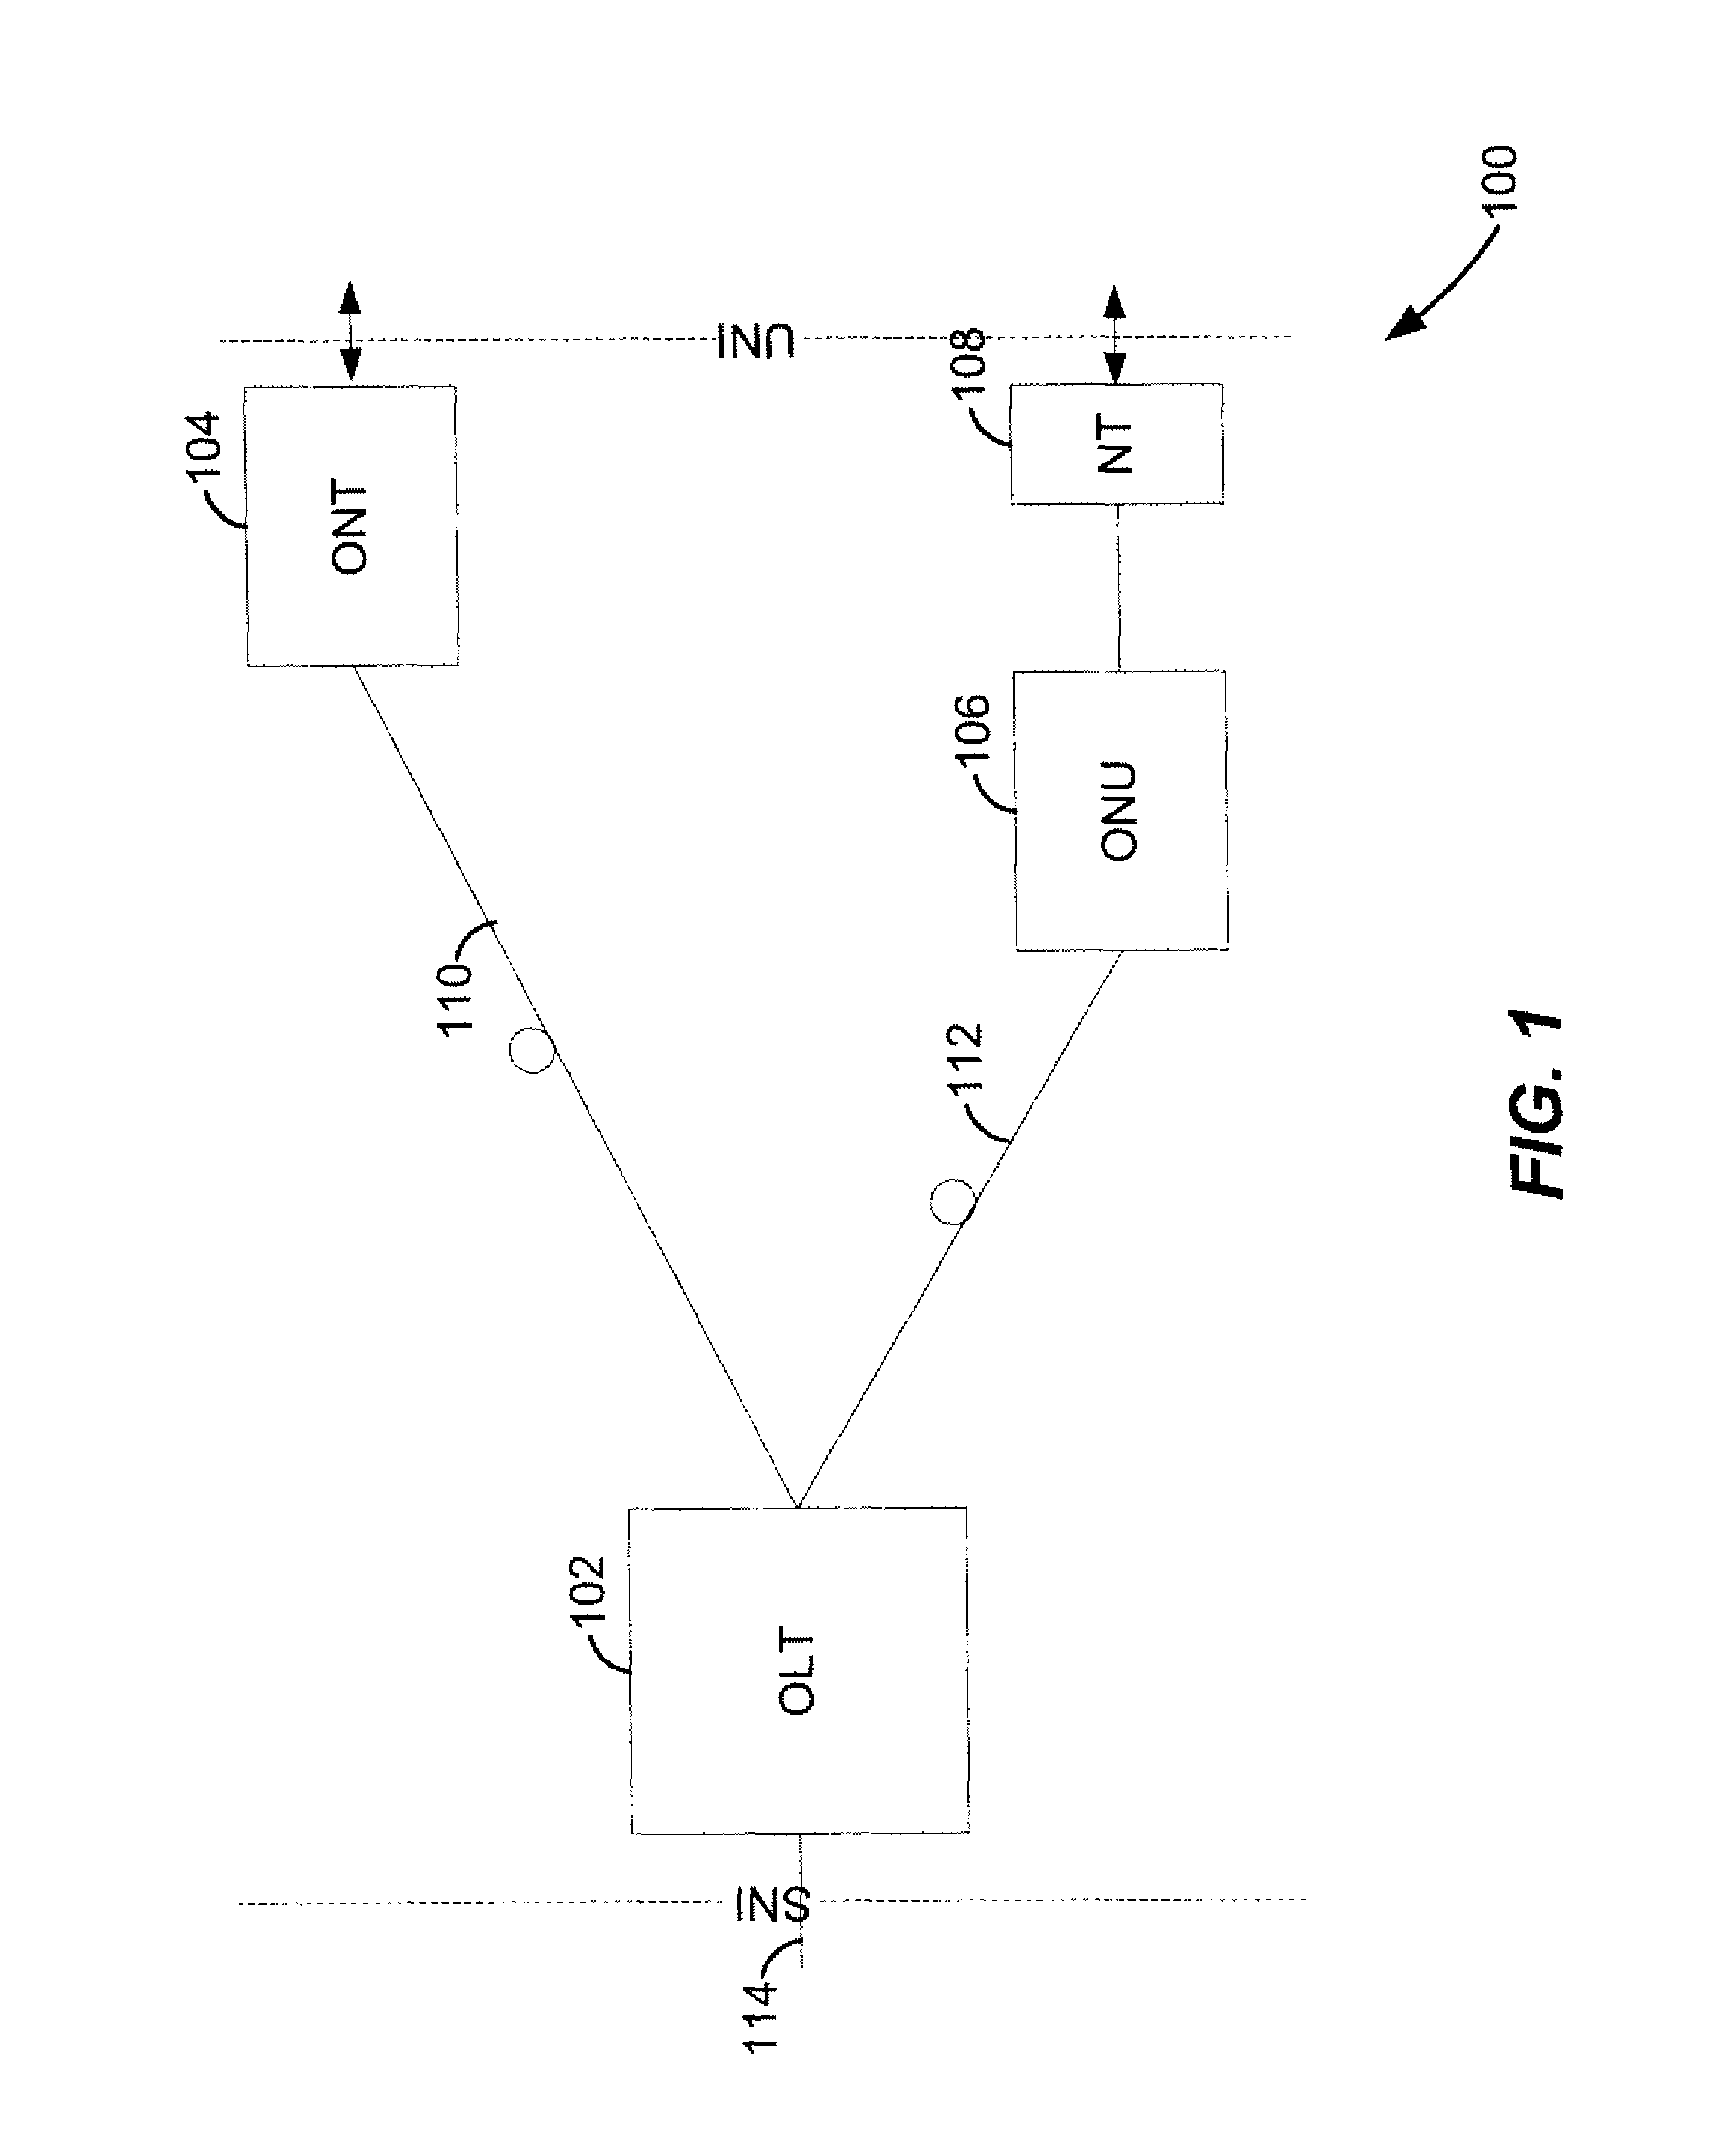 Packet buffer apparatus and method